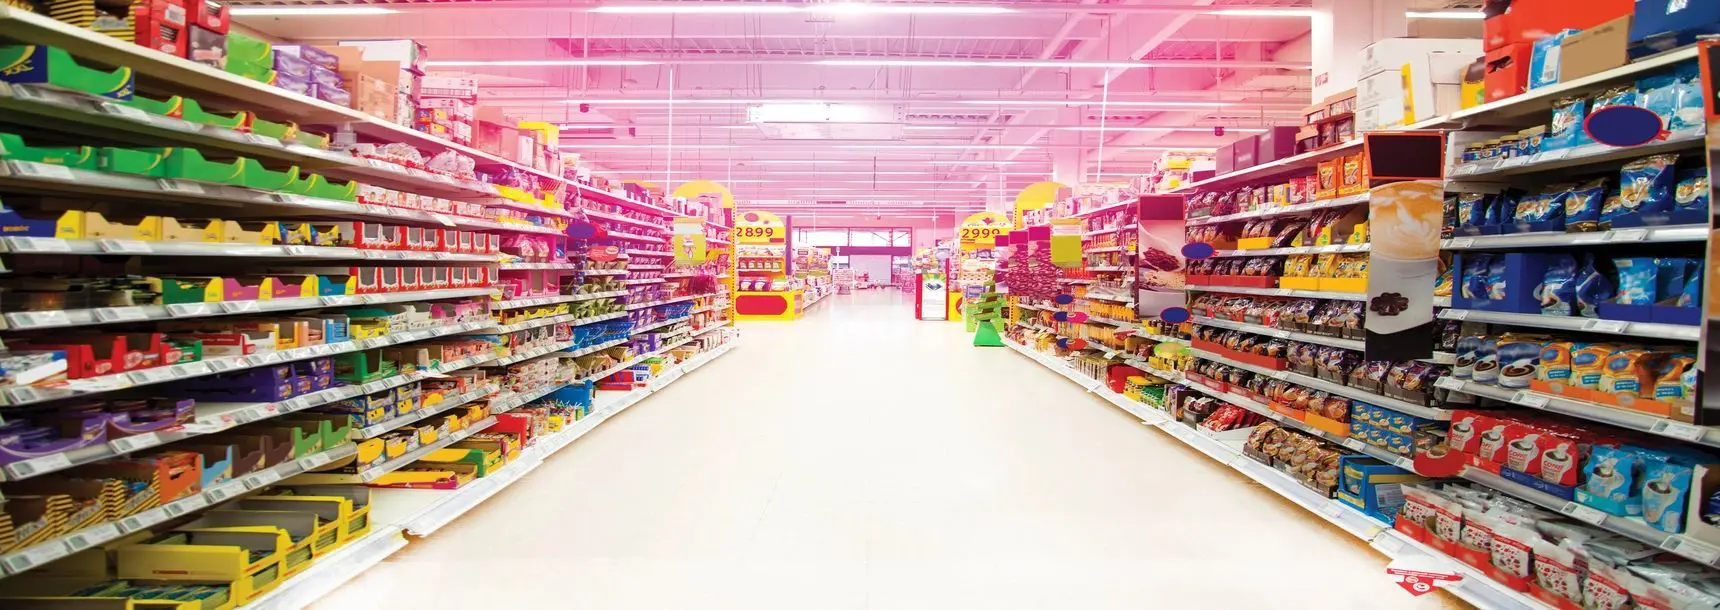 A supermarket with many shelves of food and toys.